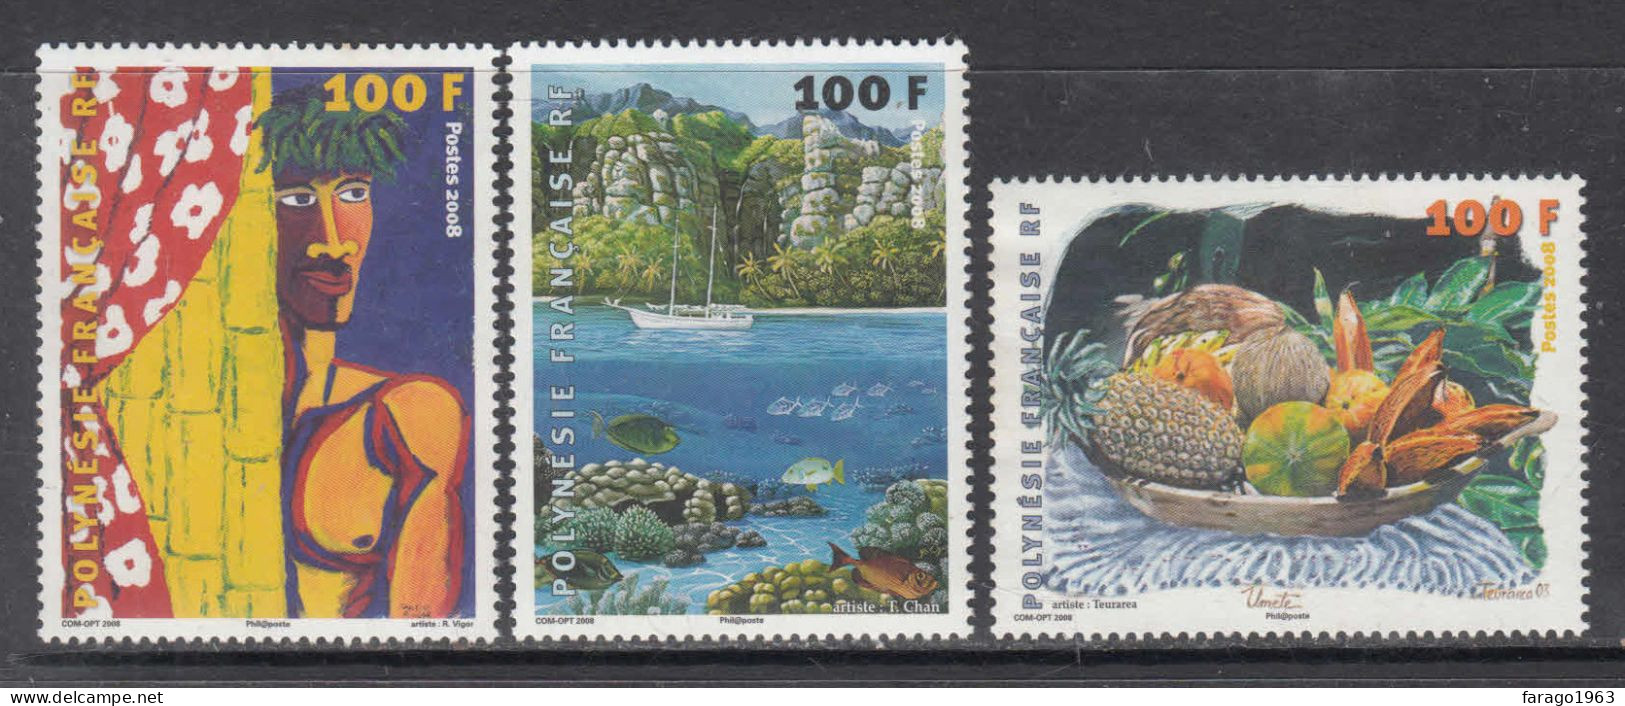 2008 French Polynesia Modern Art Complete Set Of 3 MNH - Unused Stamps